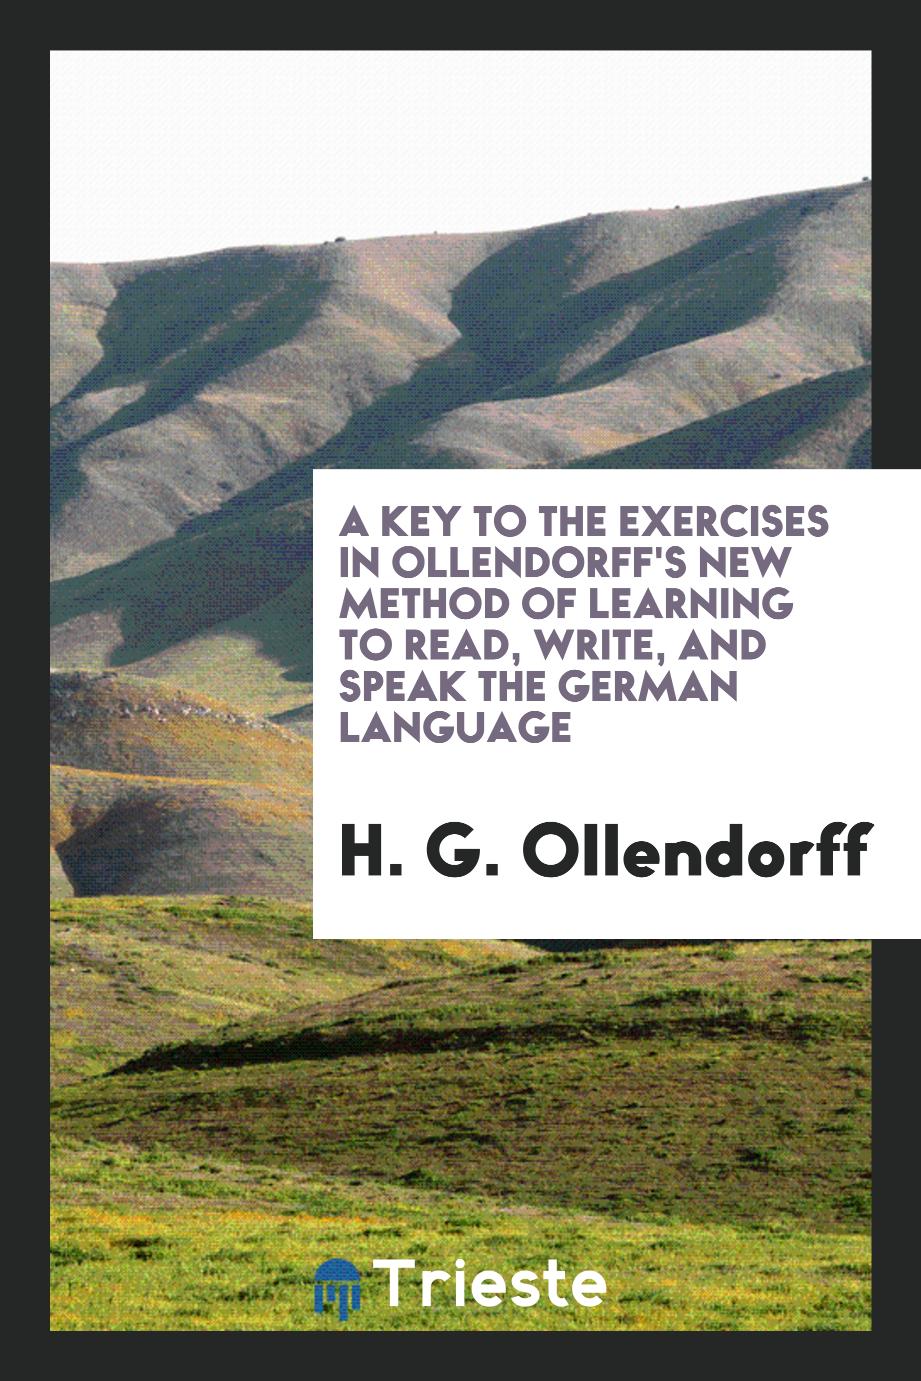 A Key to the Exercises in Ollendorff's New Method of Learning to Read, Write, and Speak the German Language